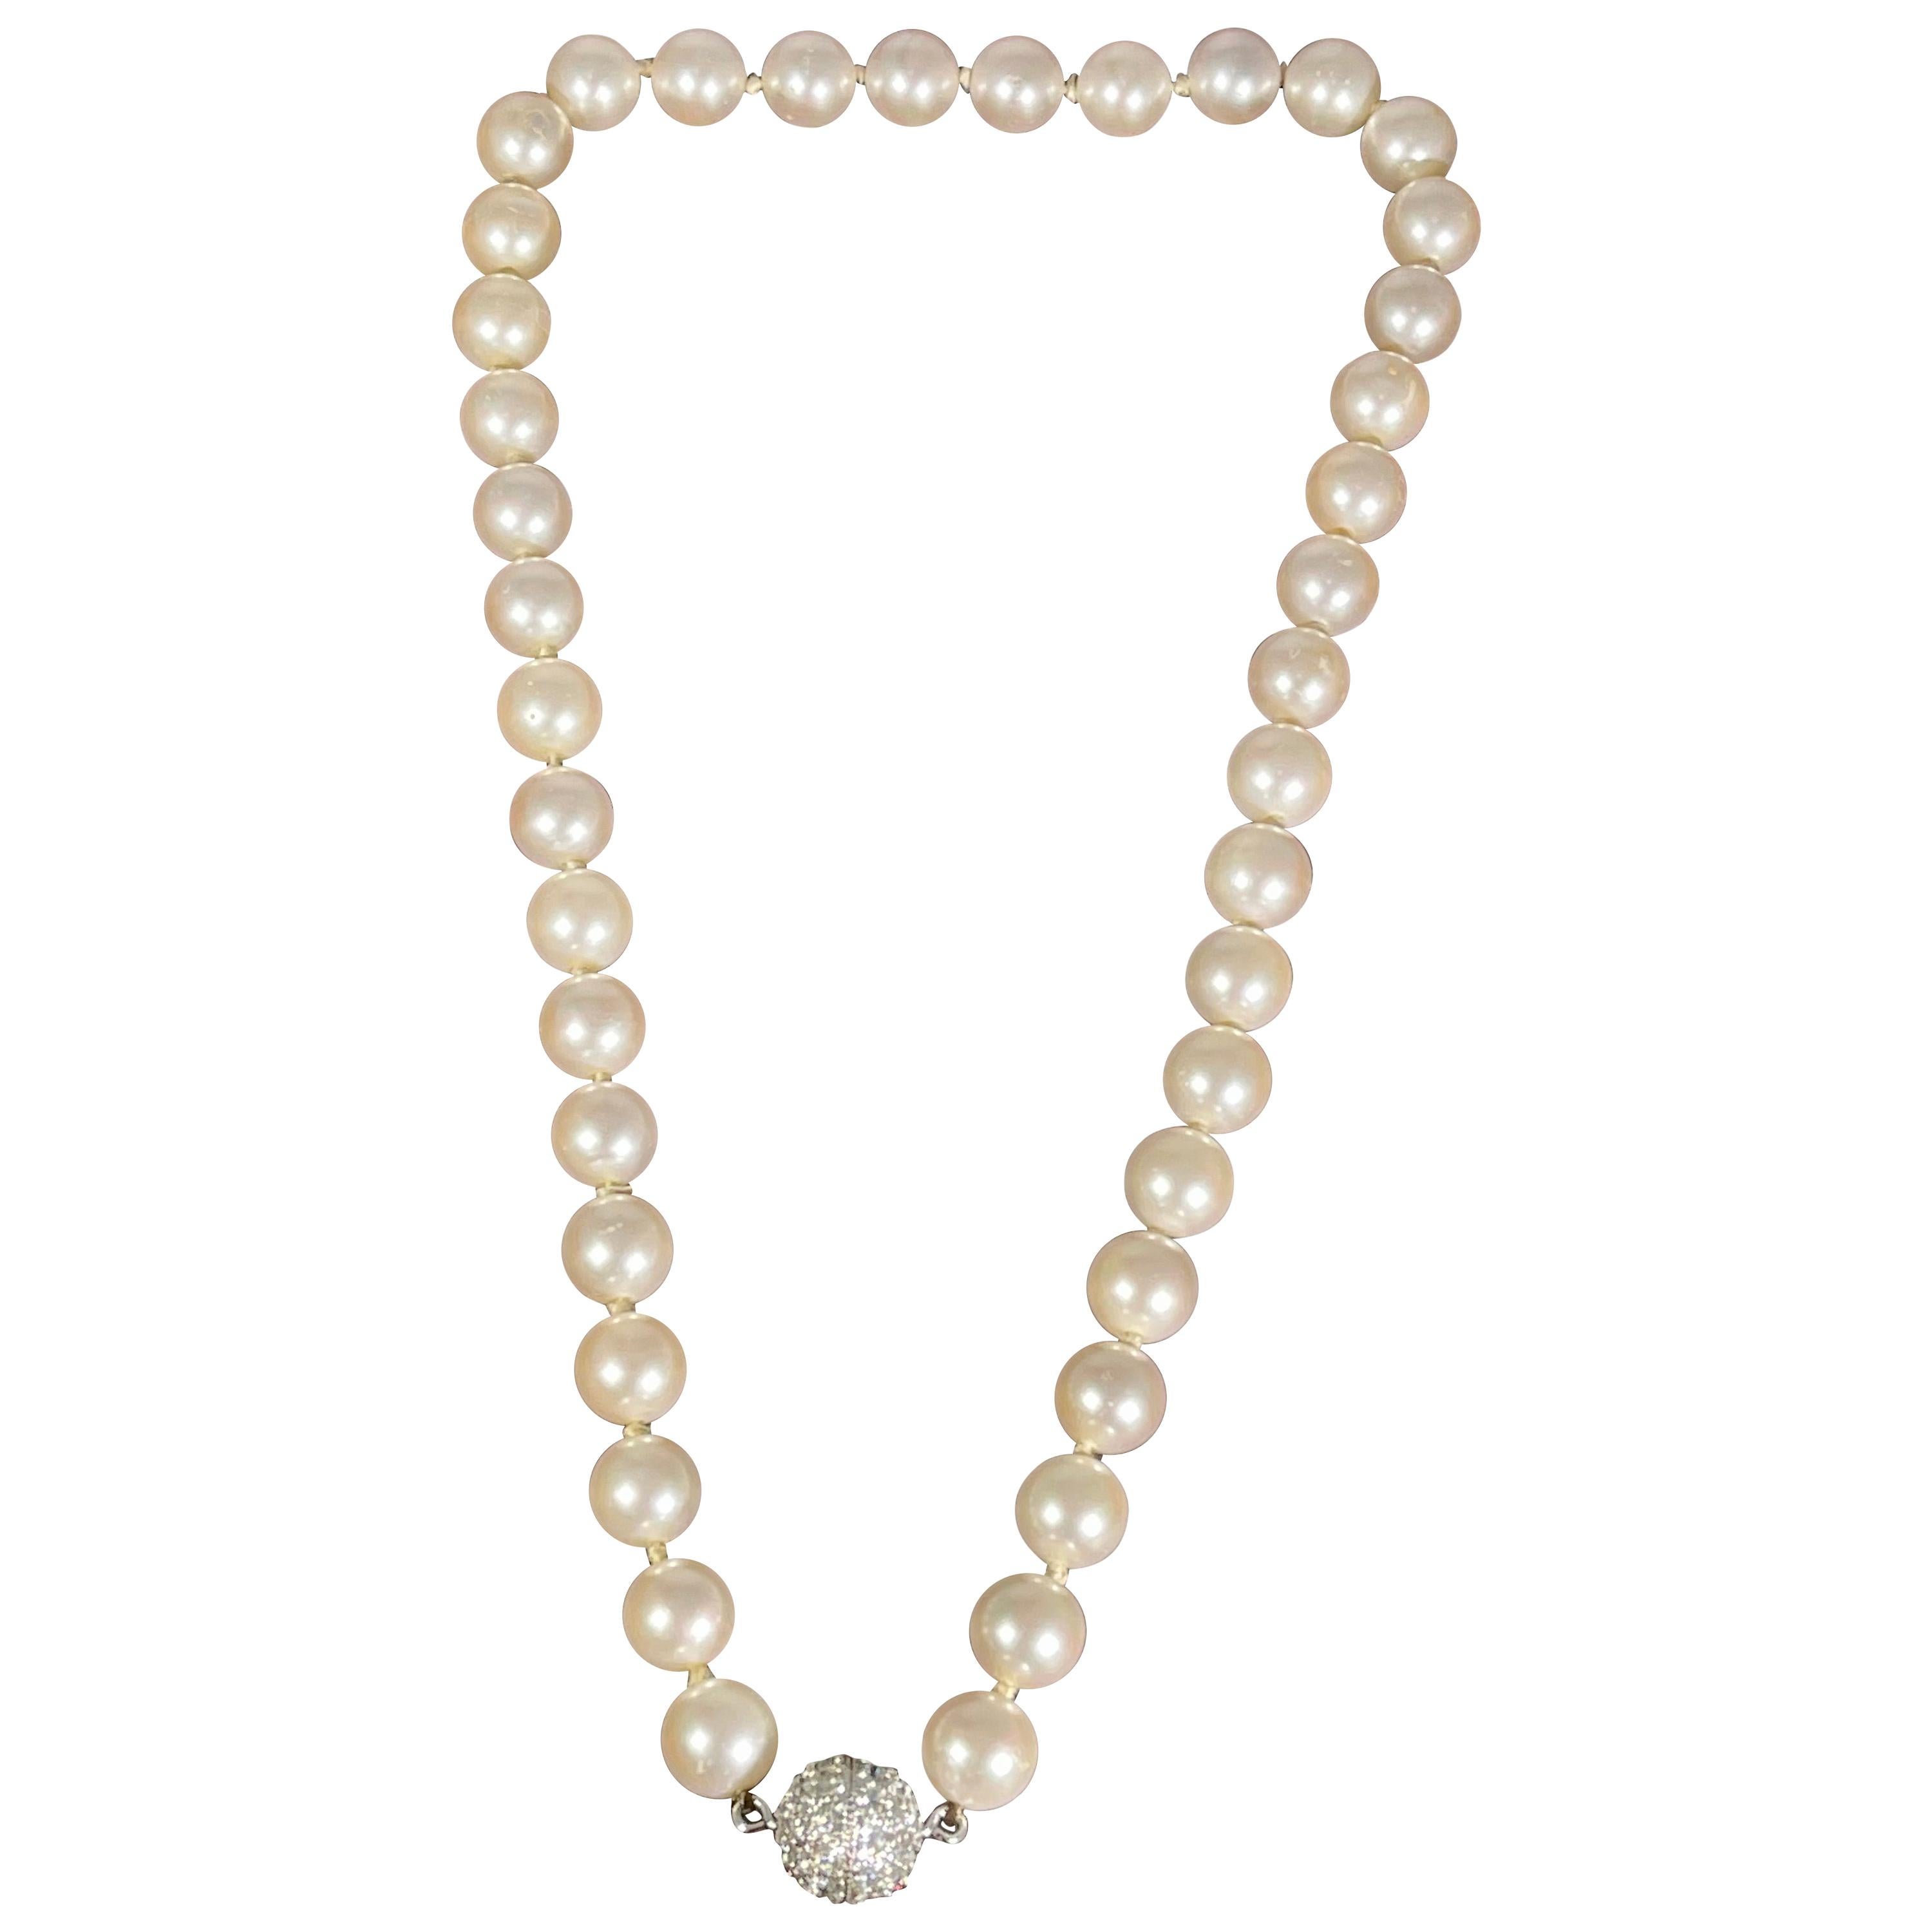 where to get pearls restrung near me